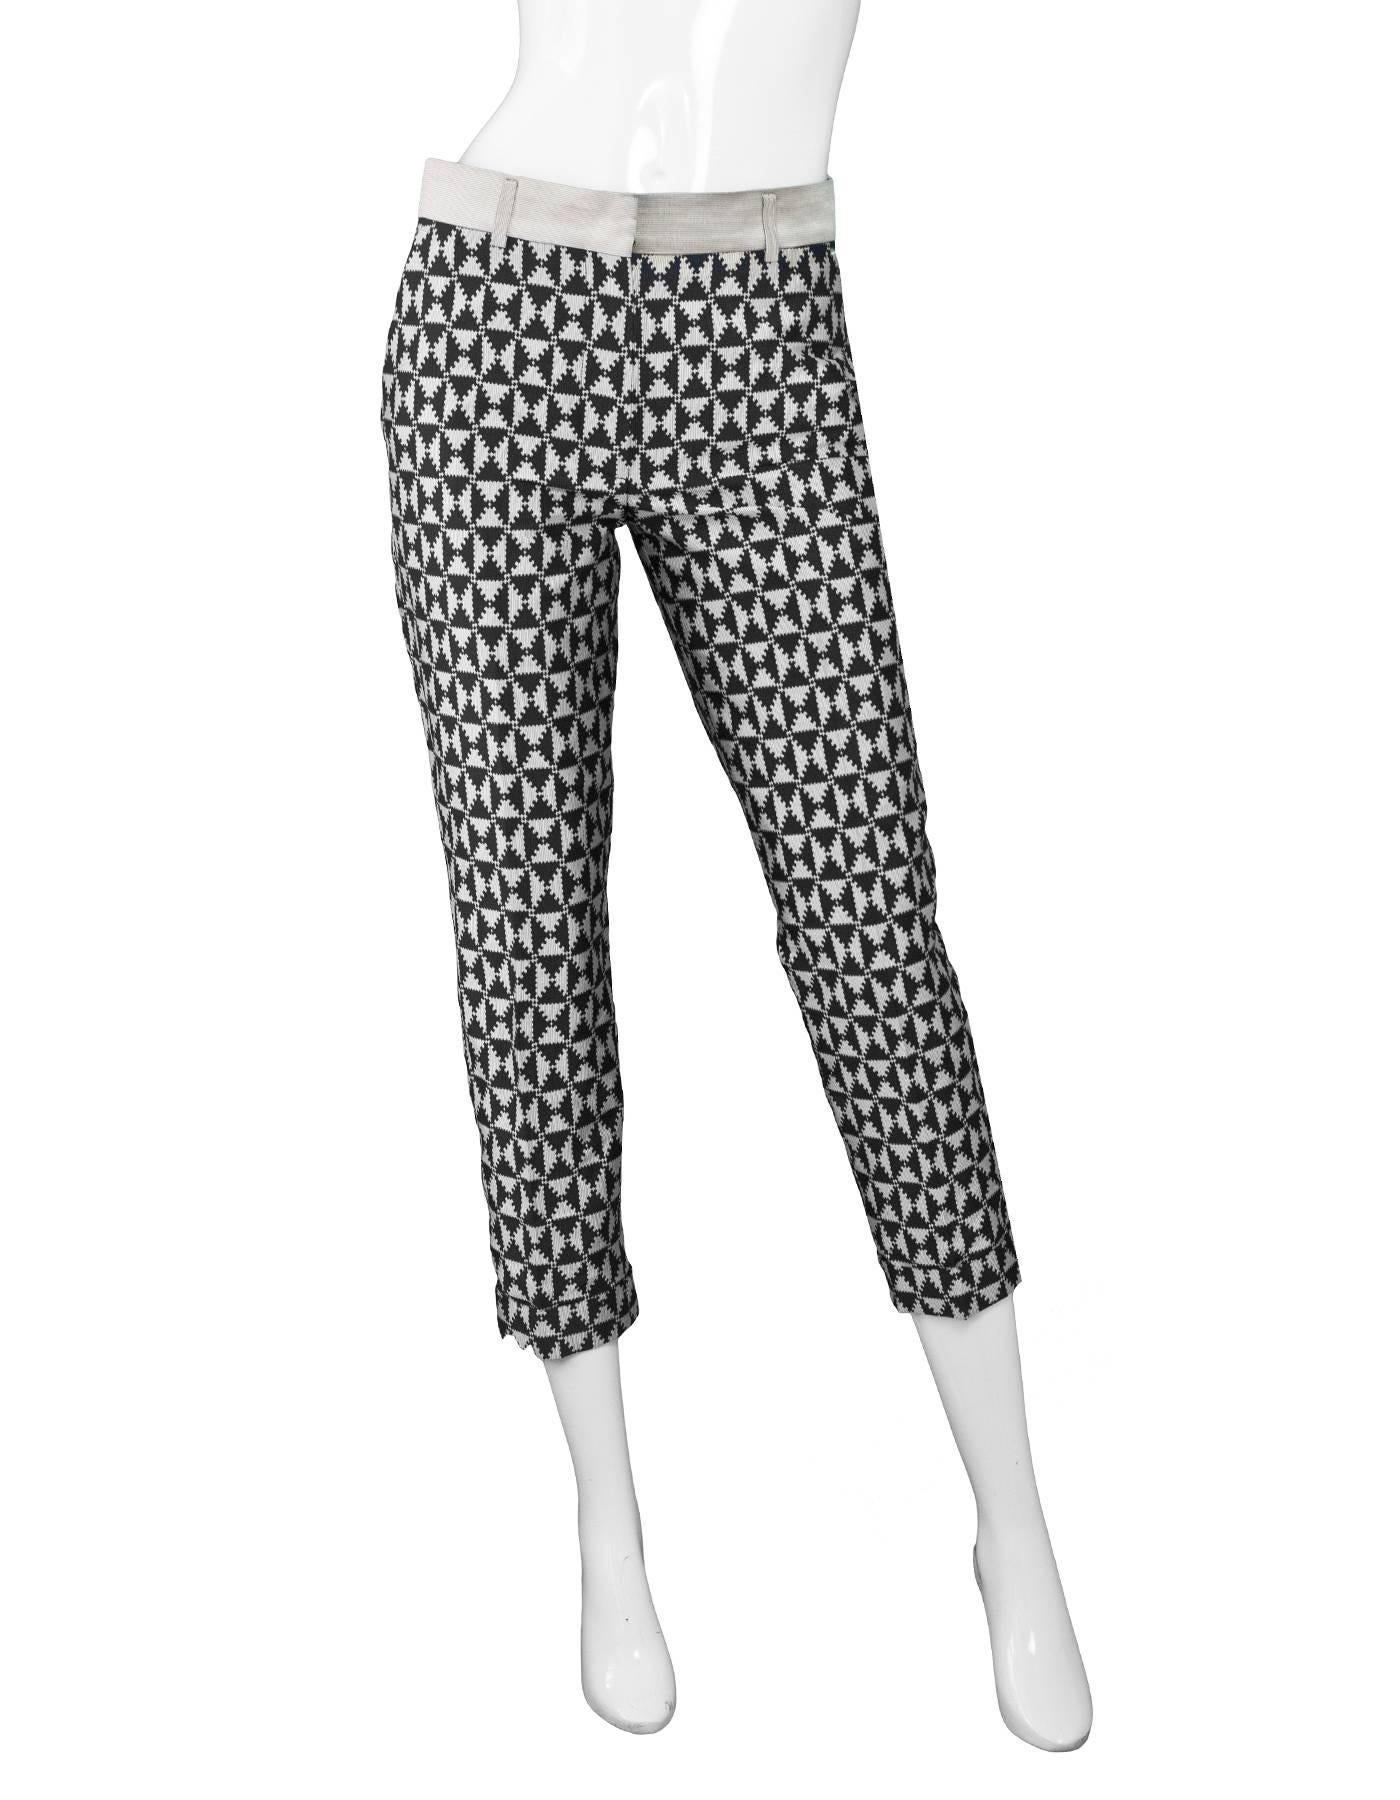 Haider Ackermann Black and Silver Print Pants Sz FR34

Made In: Romania
Color: Black, silver
Composition: 100% polyester
Lining: None
Closure/Opening: Front zip and hook and eye closure
Exterior Pockets: Two hip pockets and two back faux